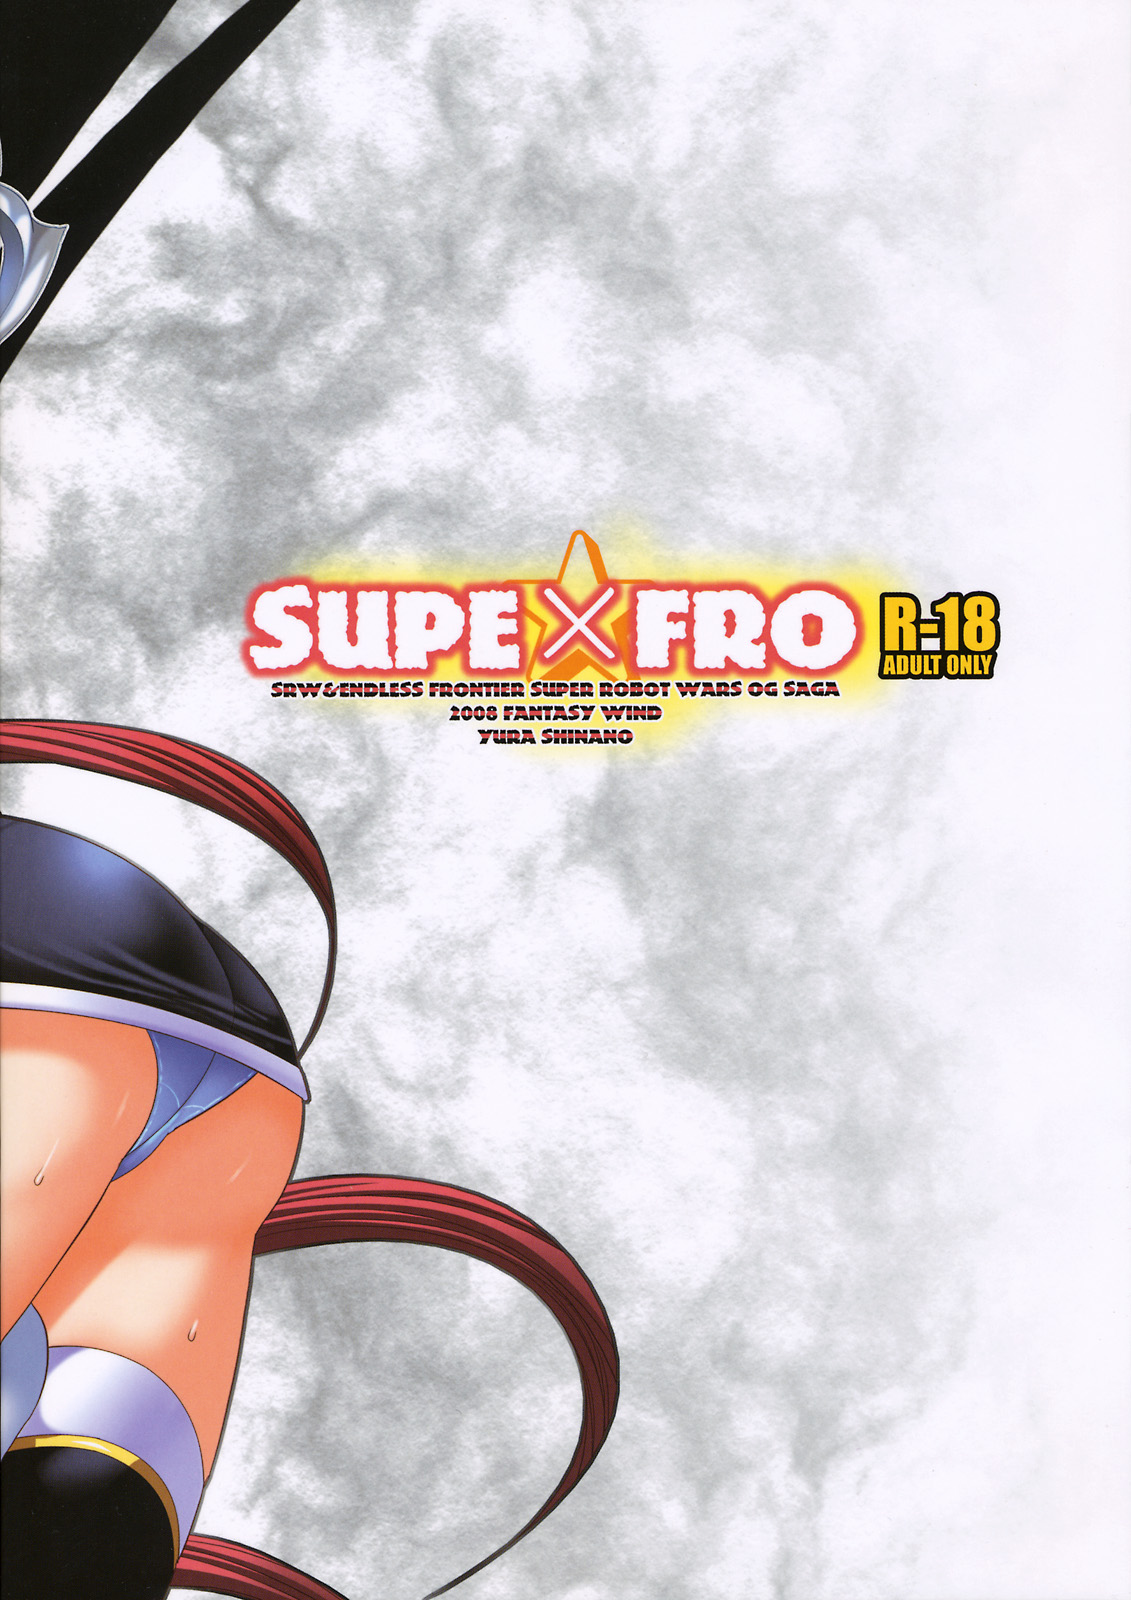 [FANTASY WIND] SUPExFRO (SRW & Endless Frontier)[Eng] page 27 full